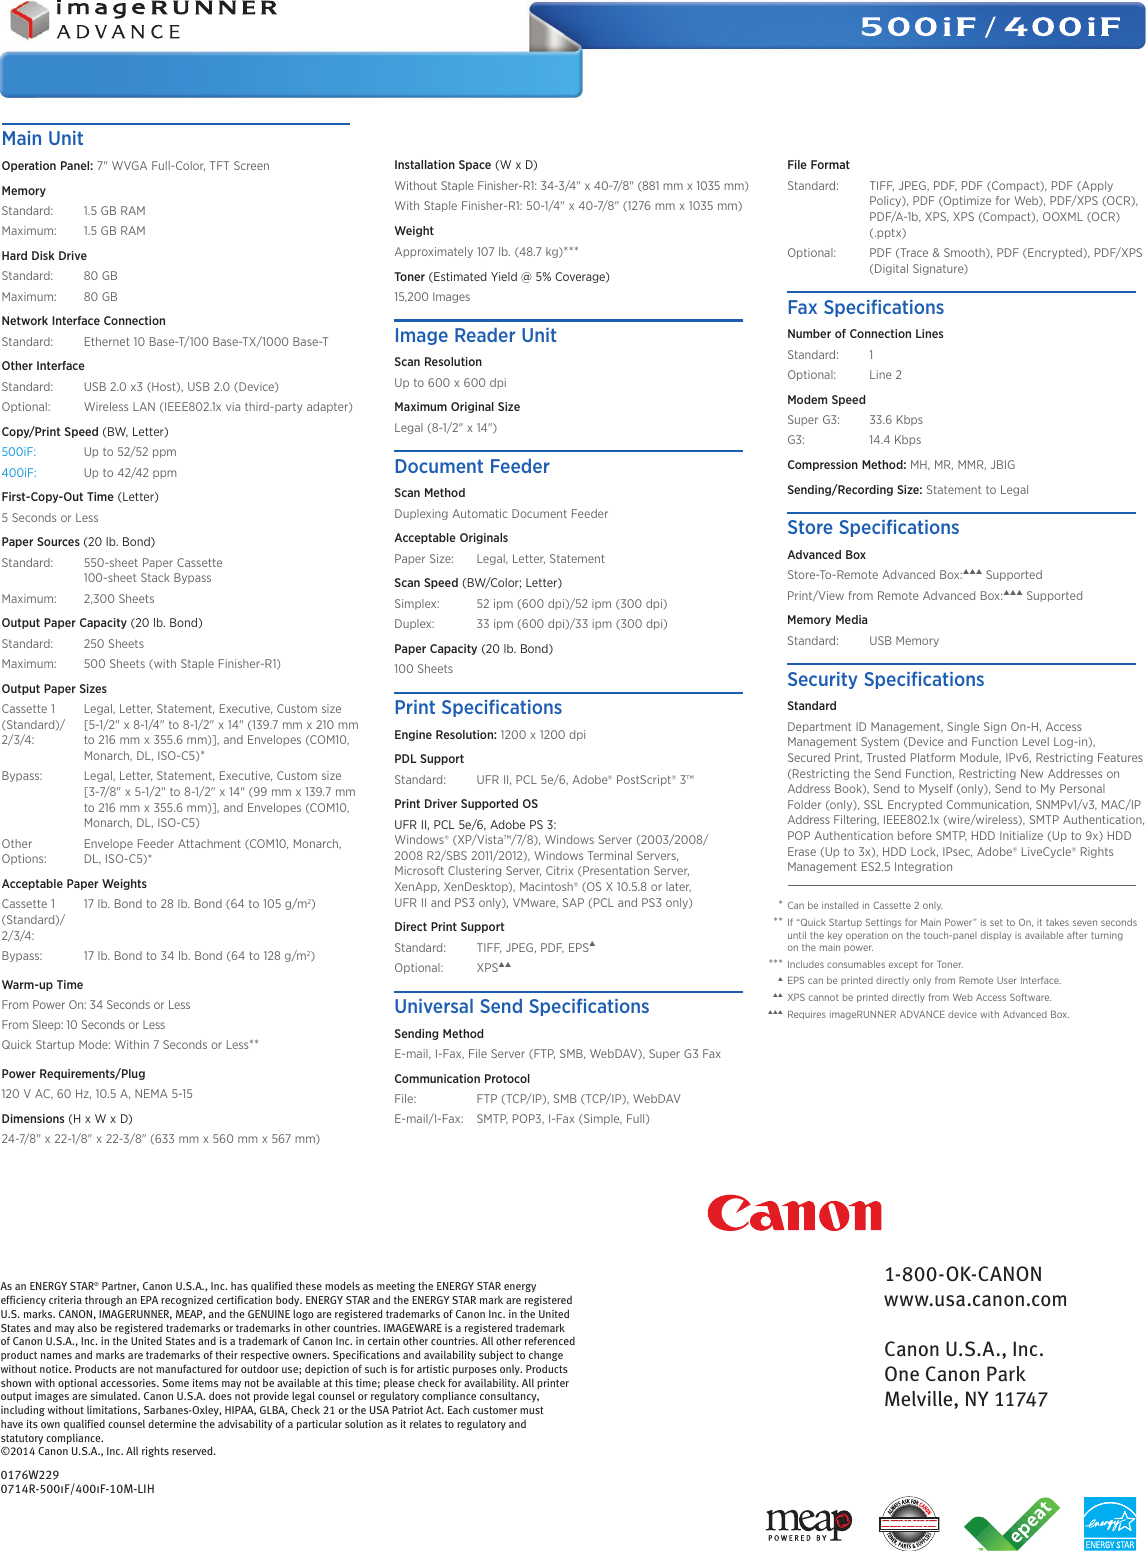 Page 12 of 12 - Canon Canon-Imagerunner-Advance-400If-Brochure- ImageRUNNER ADVANCE 500iF / 400iF  Canon-imagerunner-advance-400if-brochure